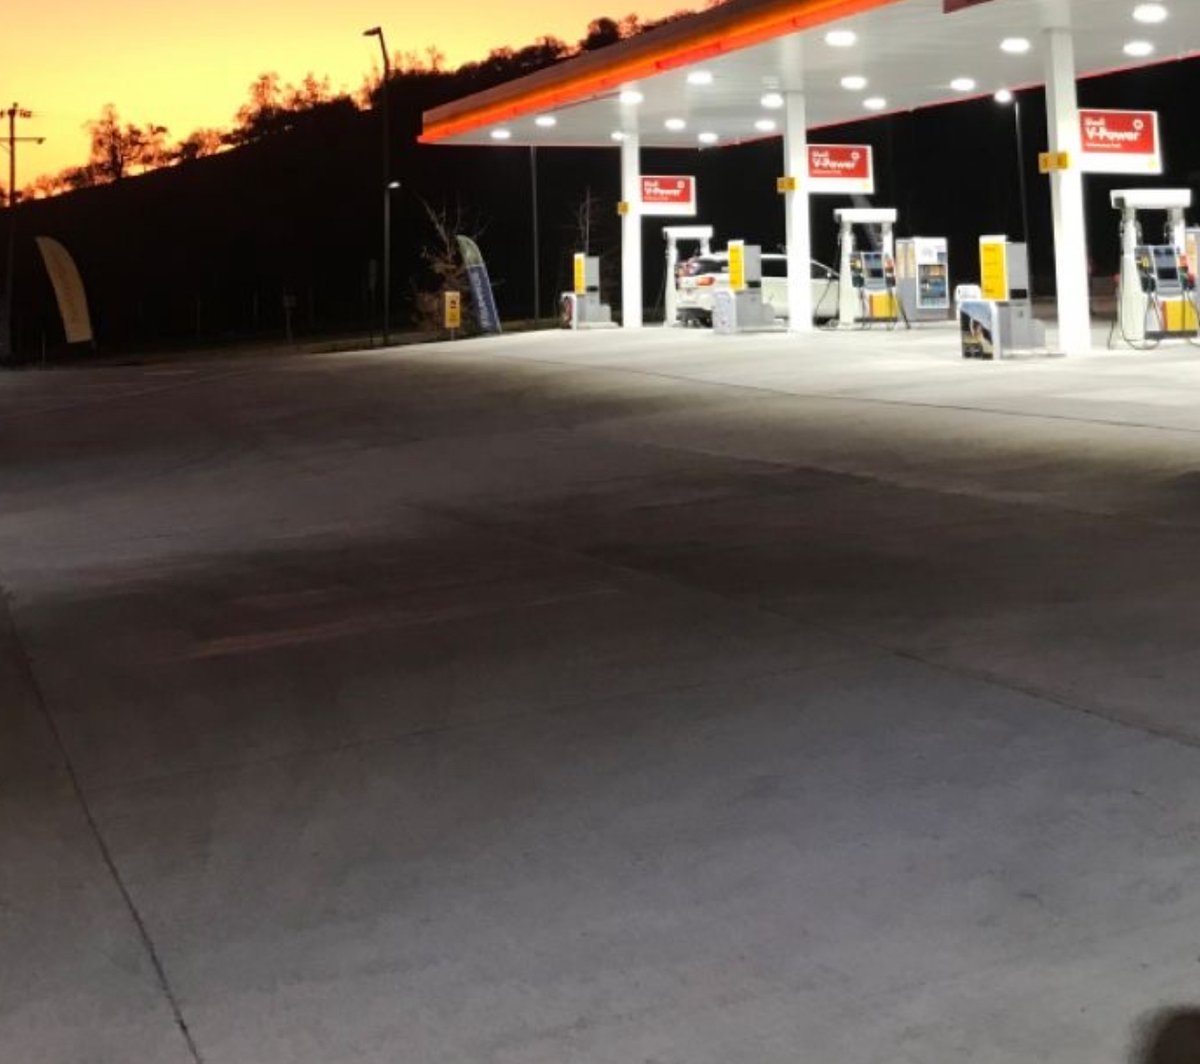 Let’s fuel up and chase those spring sunsets togethers! Sign up today at MyPayByCar.com to use PayByCar and go grab a cup of coffee!
#paybycar #ezpass #massdot #drivenbyezpass #EasternMass #CapeCod #Nightshift #contactlesspayments #paybytext #smspayments #connectedcar